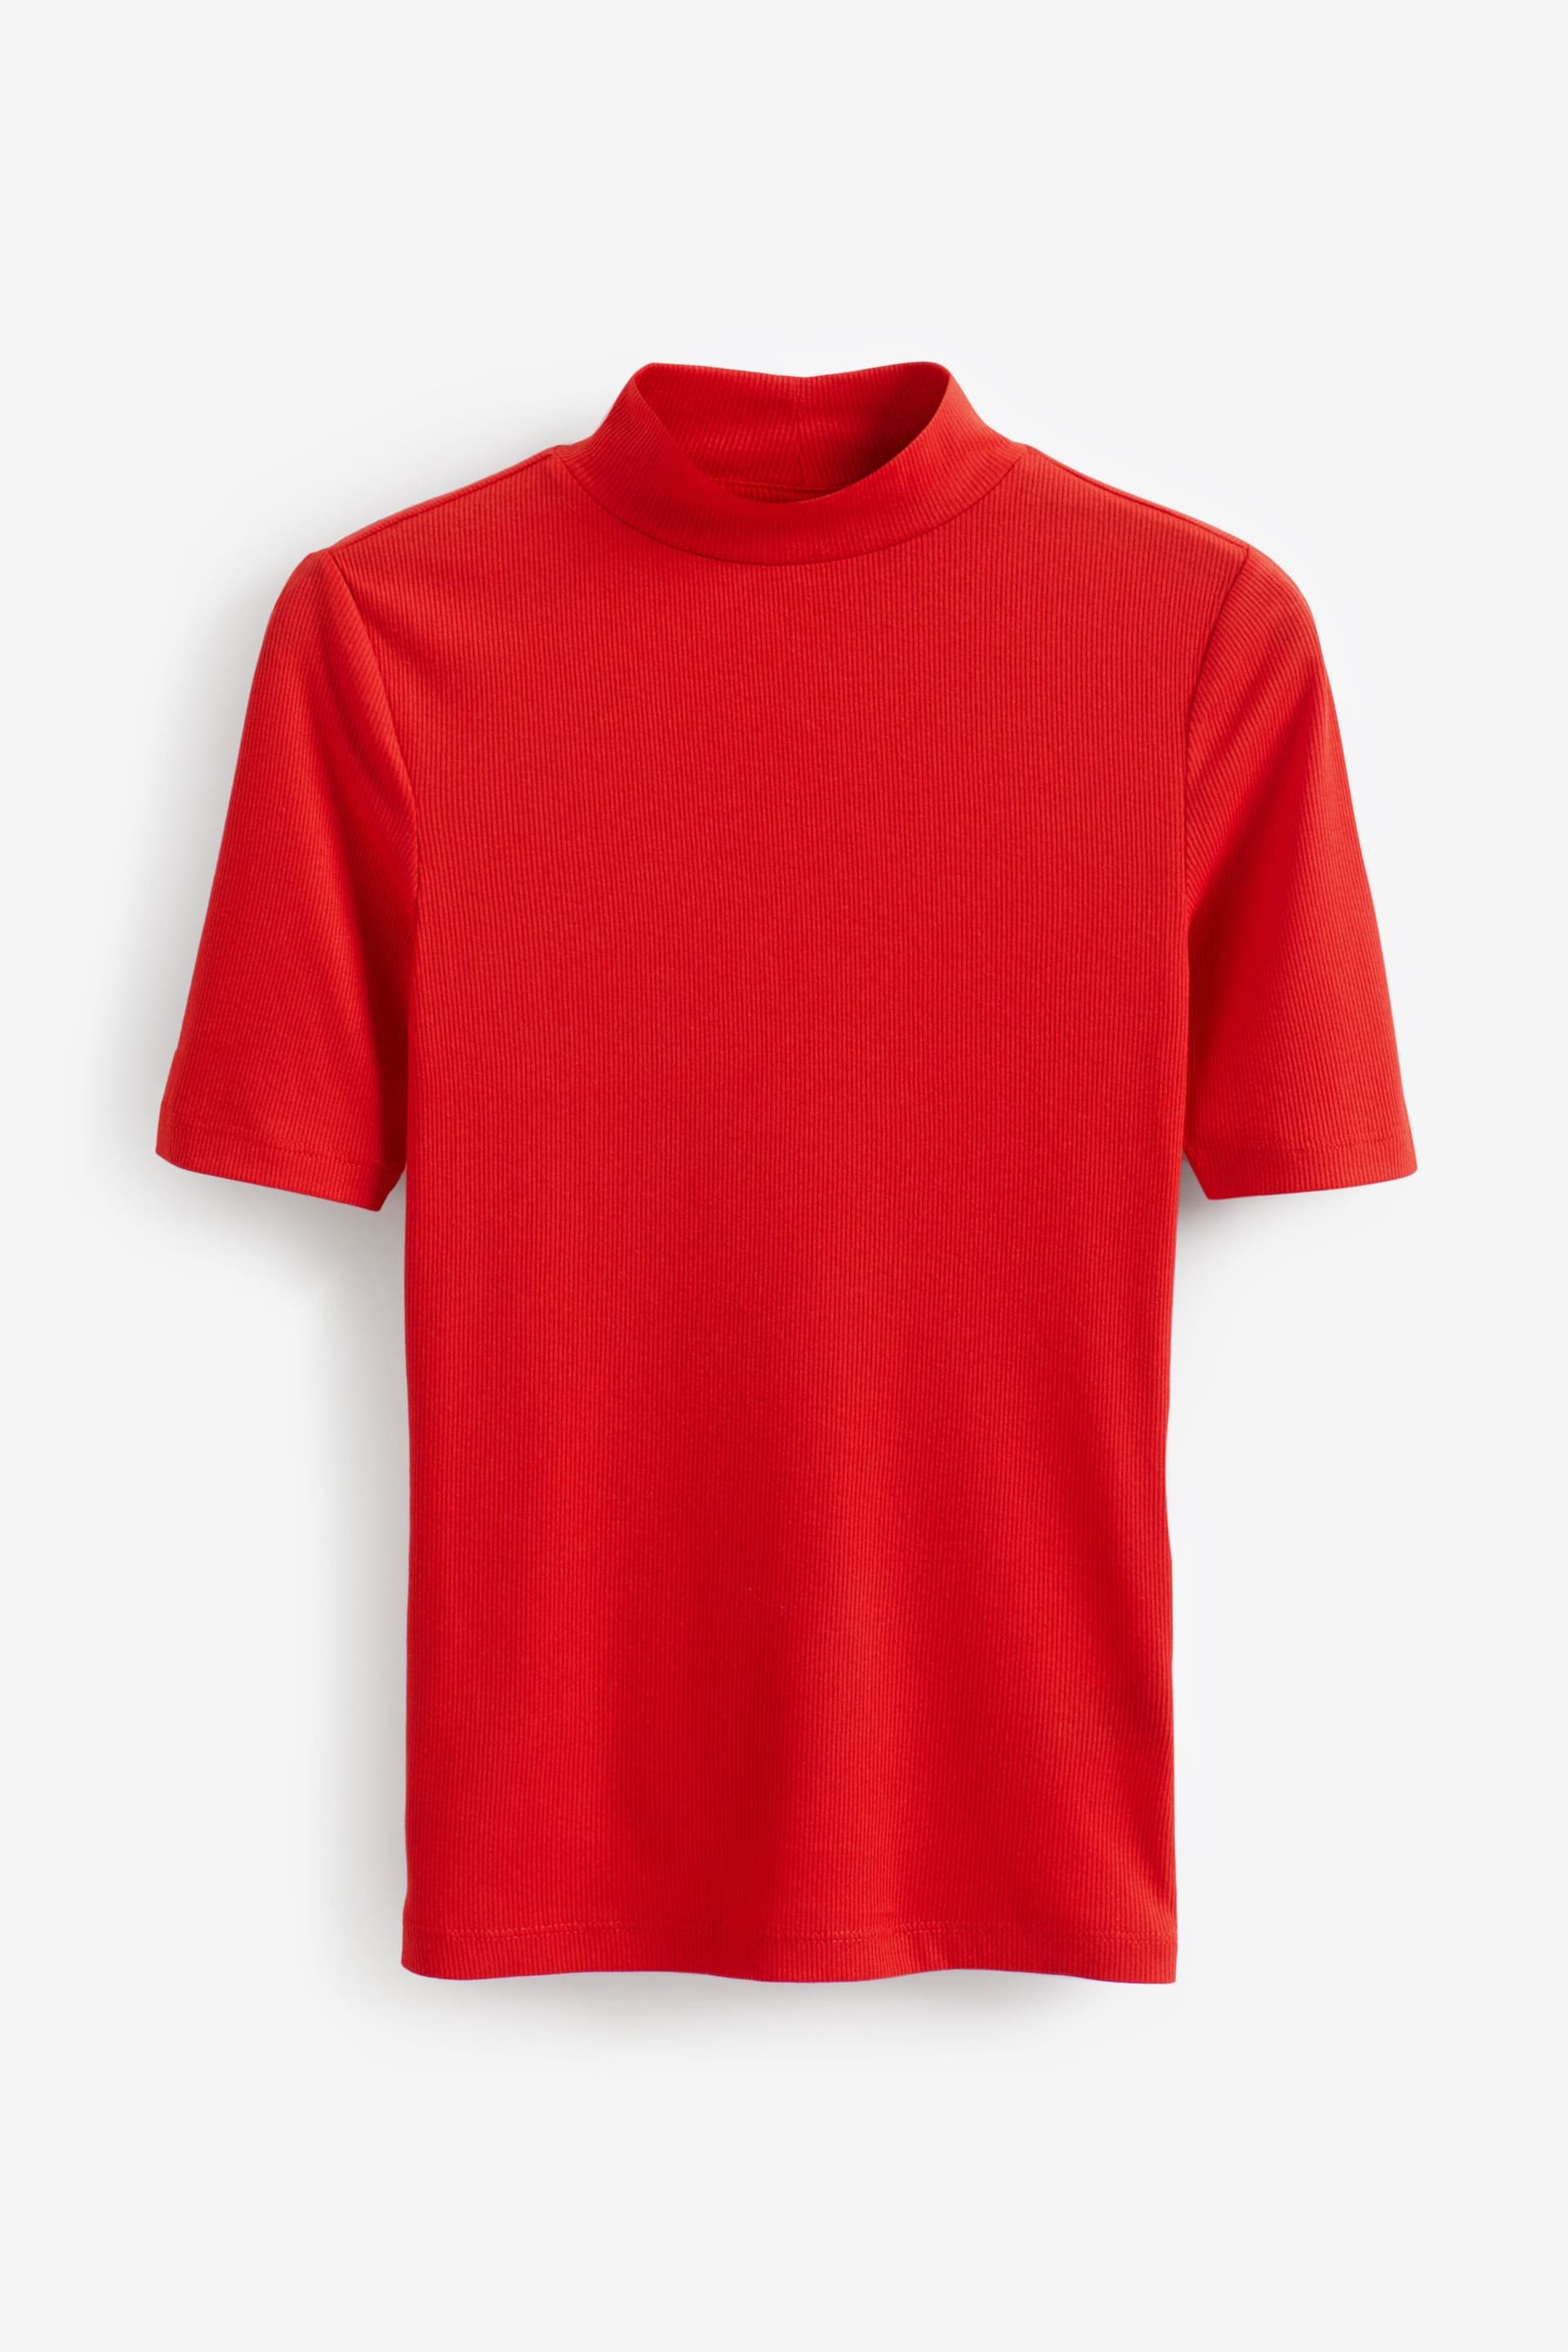 Red Half Sleeve High Neck T-Shirt - Image 5 of 6